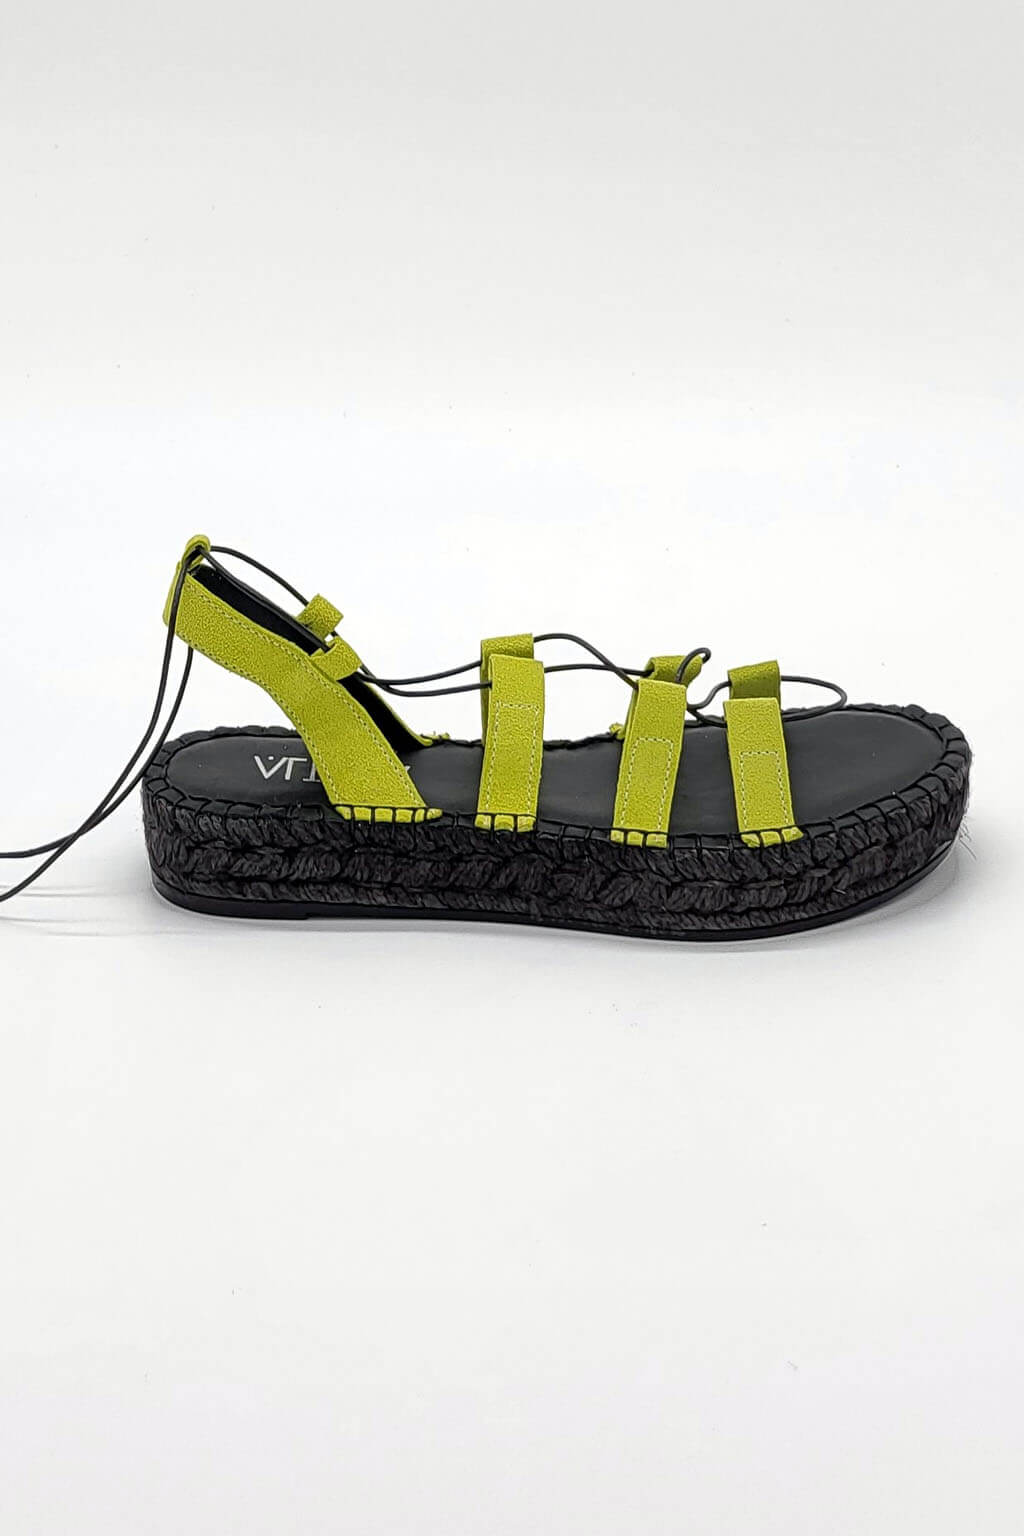 cemeli-lime-altana-leather-laceup-espandrille-sandals-2